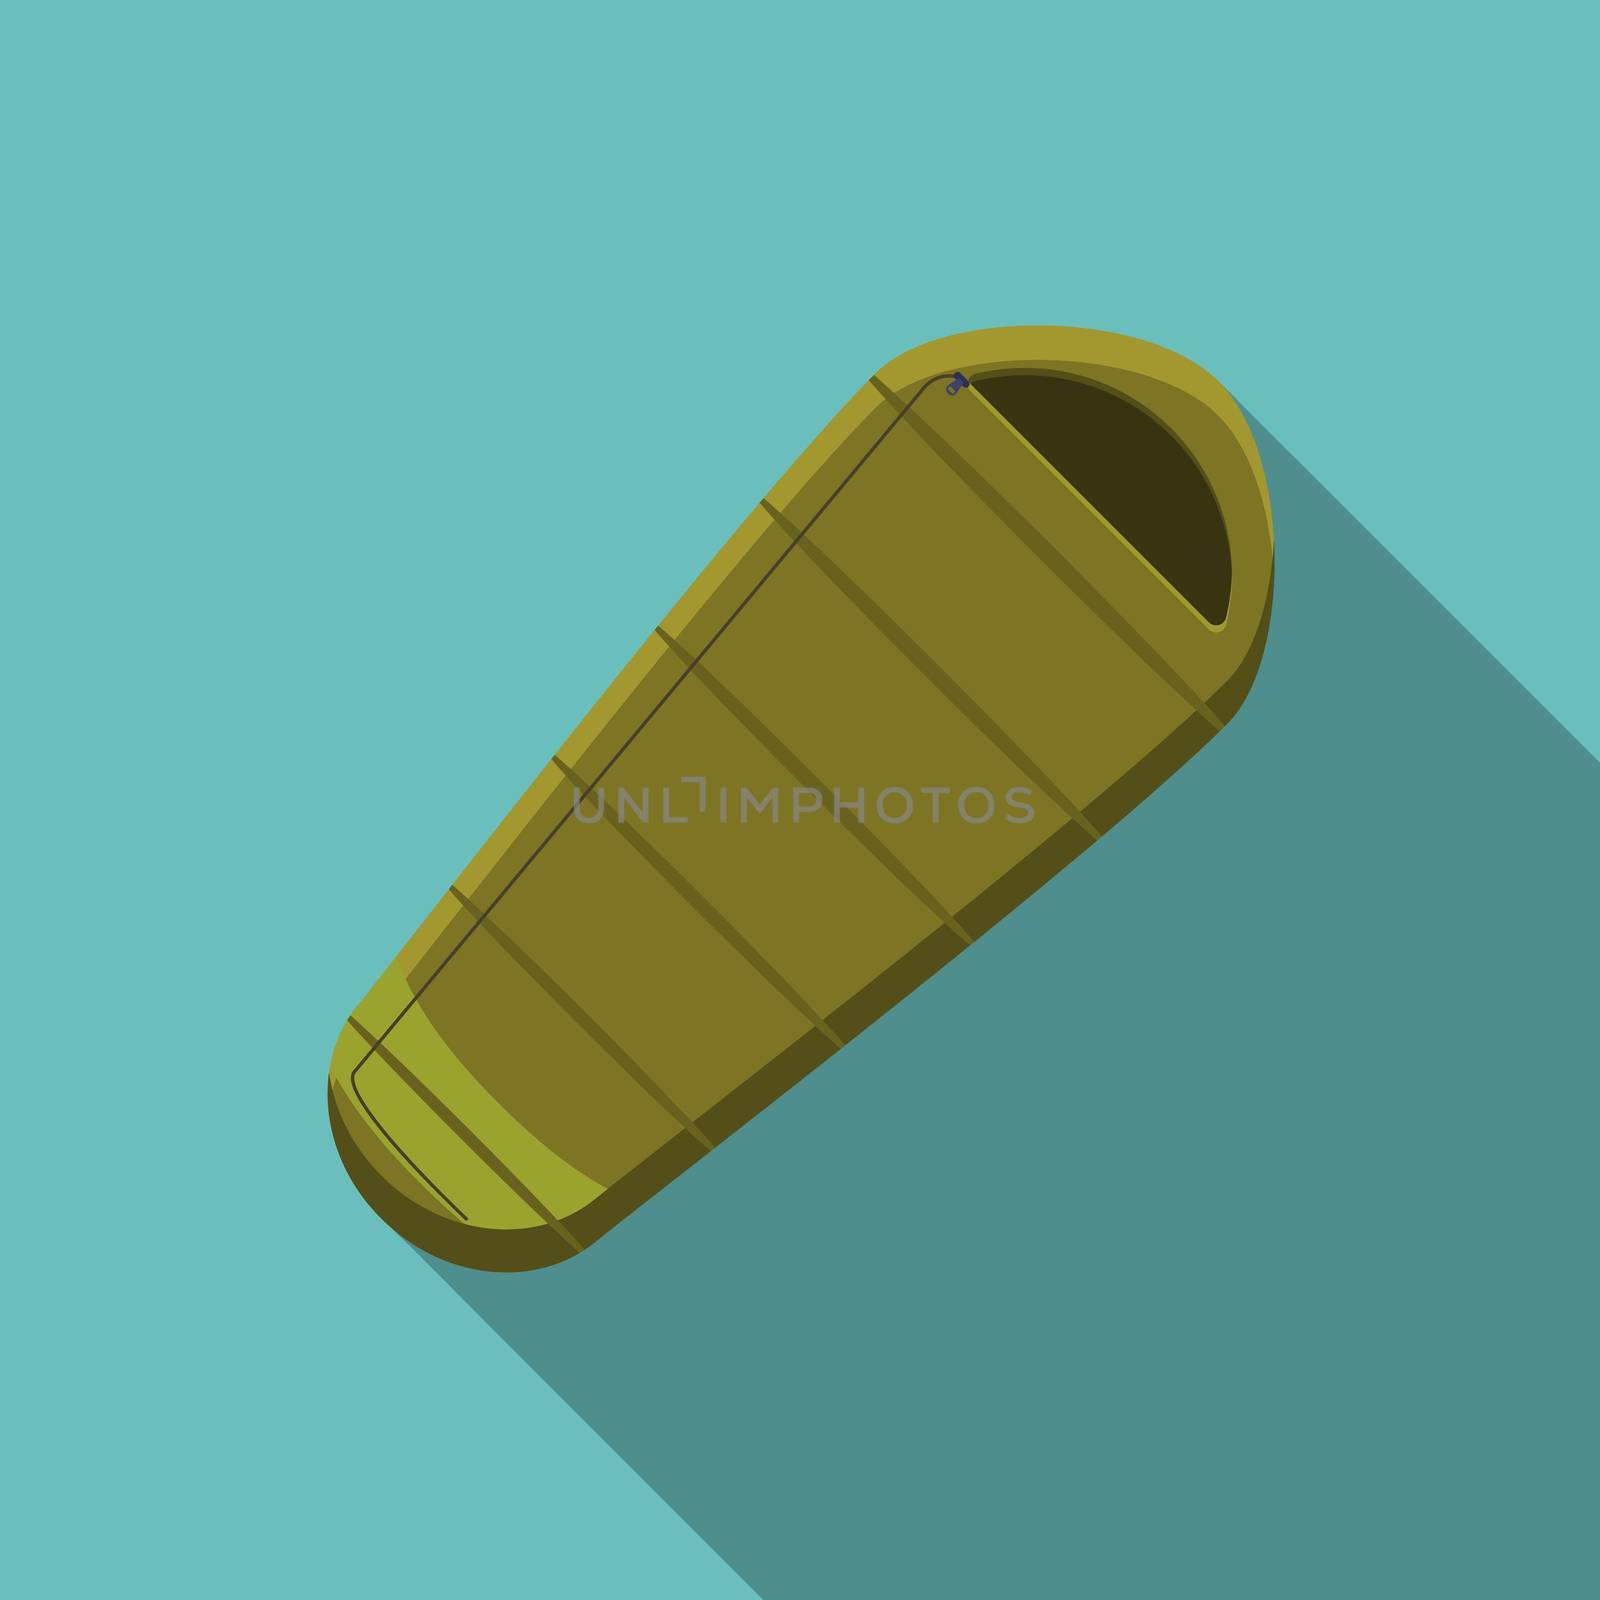 Flat design modern vector illustration of sleeping bag icon, camping and hiking equipment with long shadow.